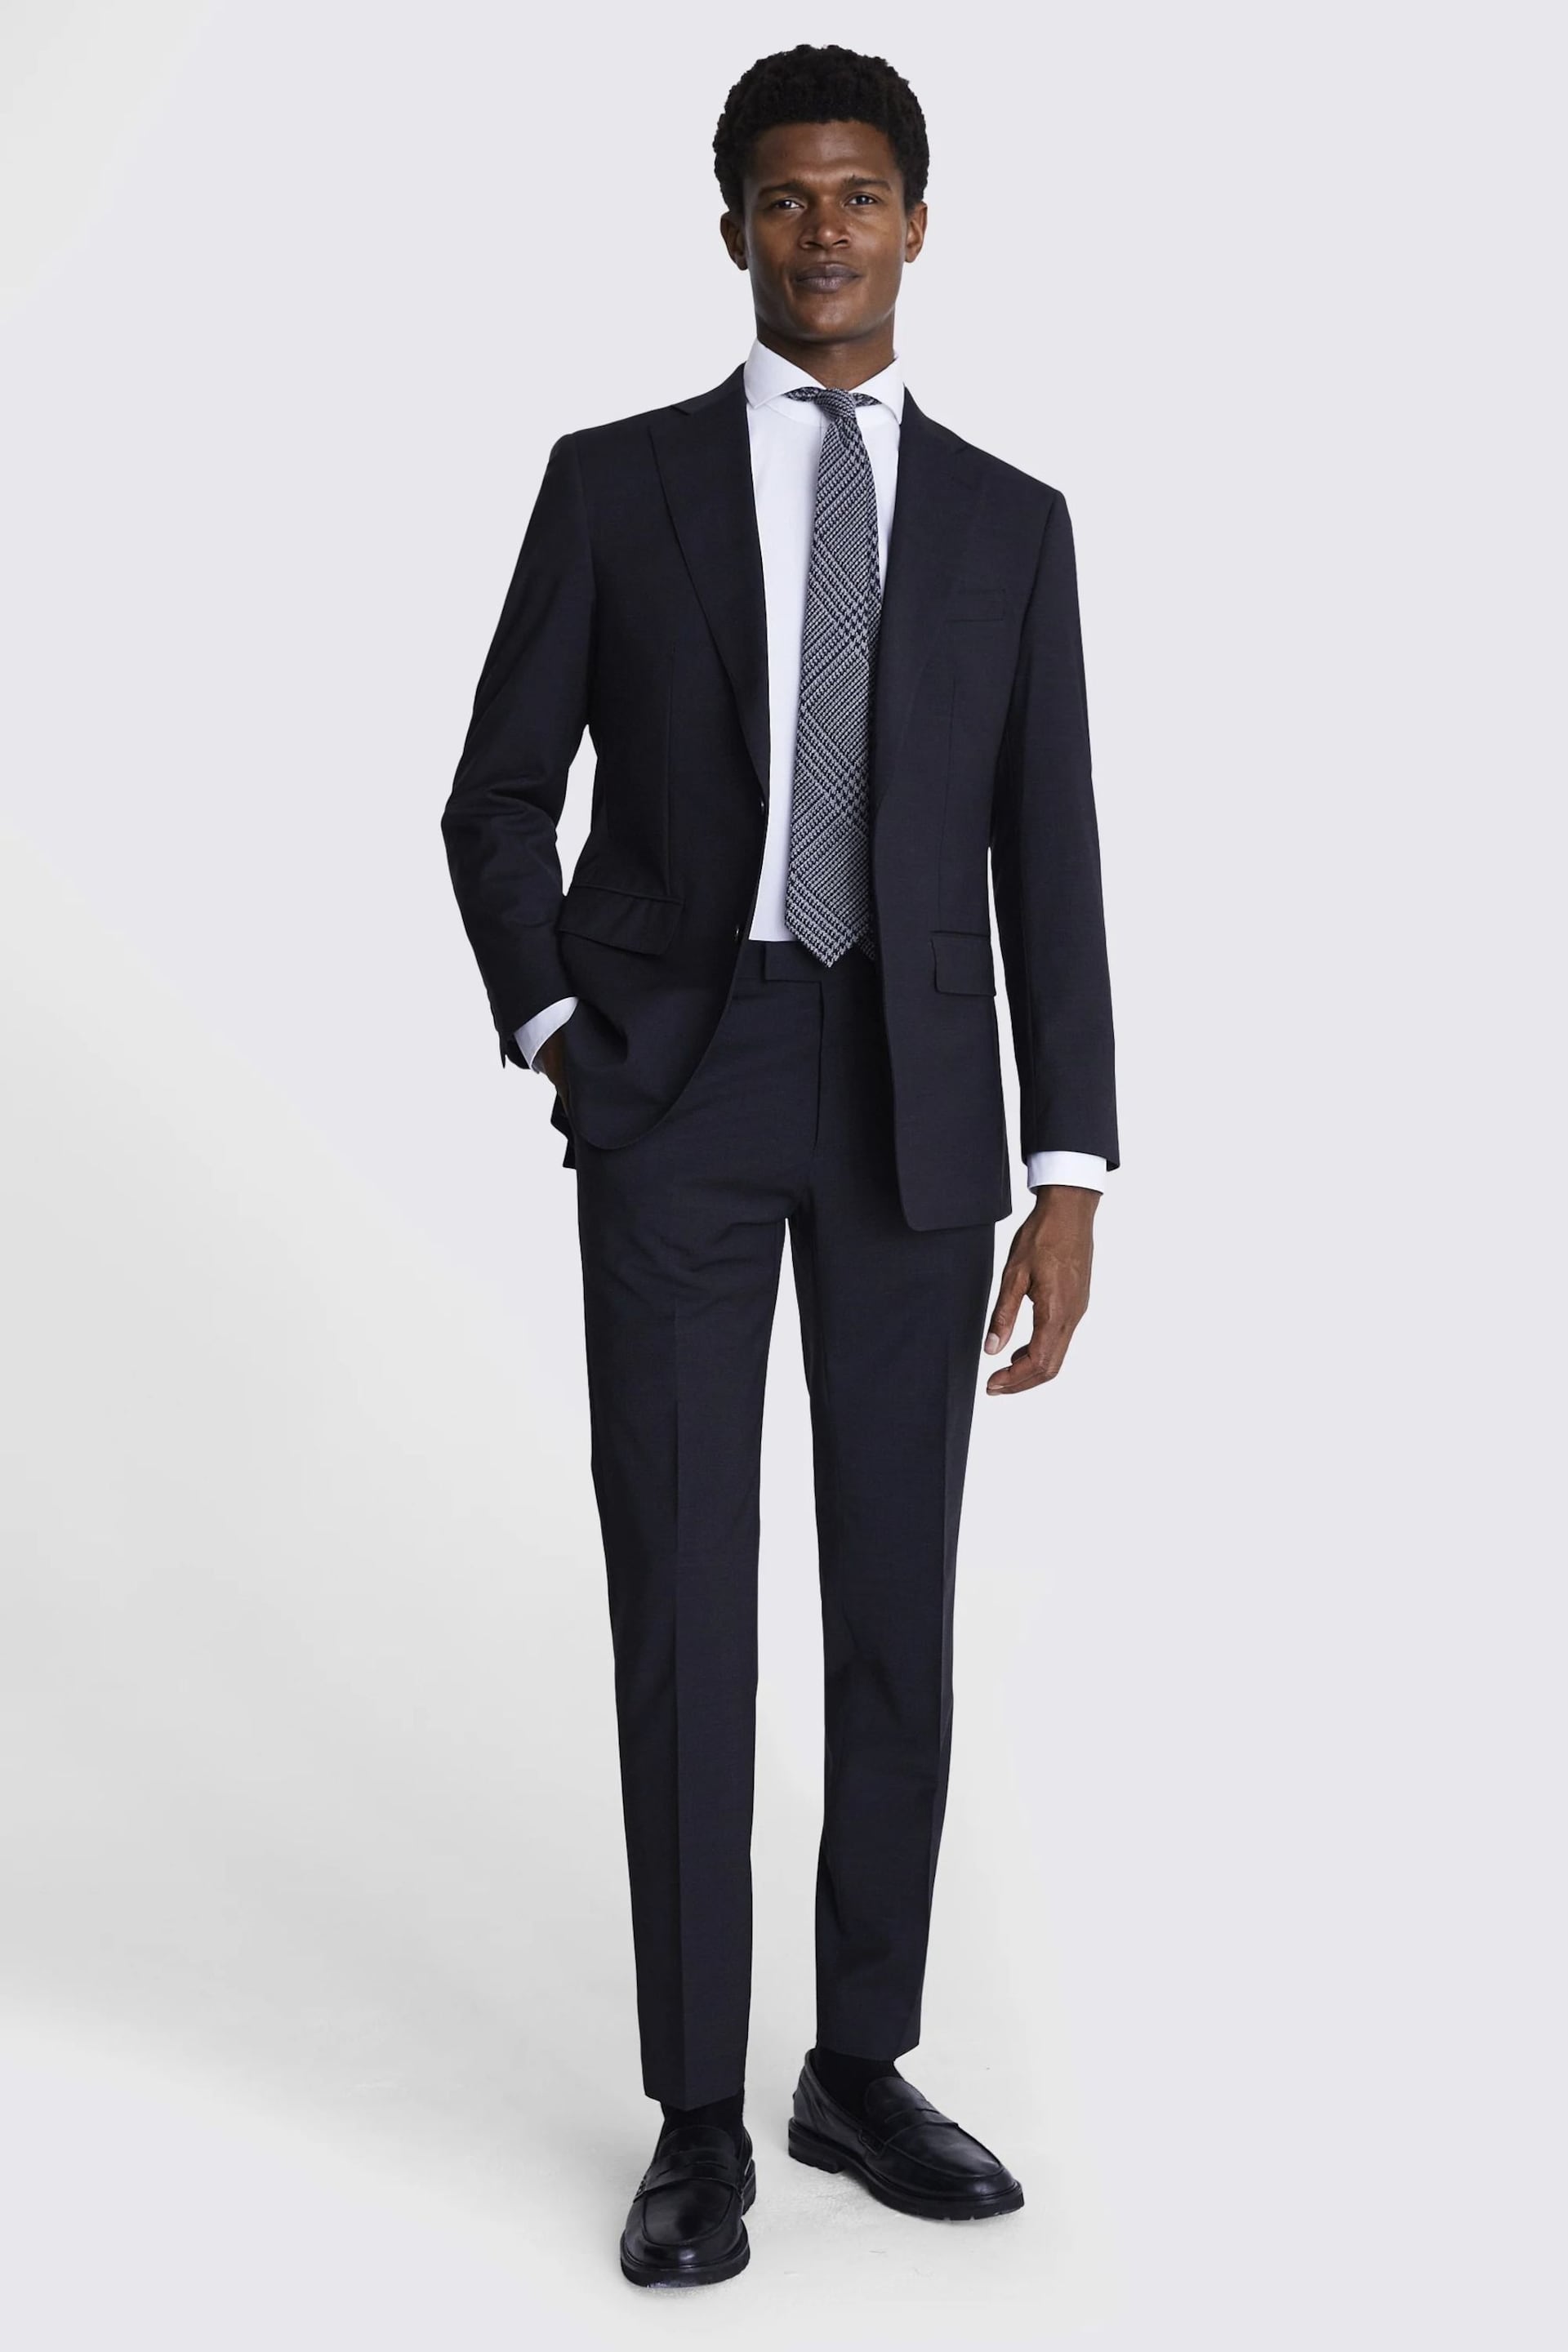 MOSS Charcoal Grey Tailored Fit Performance Suit Jacket - Image 5 of 7